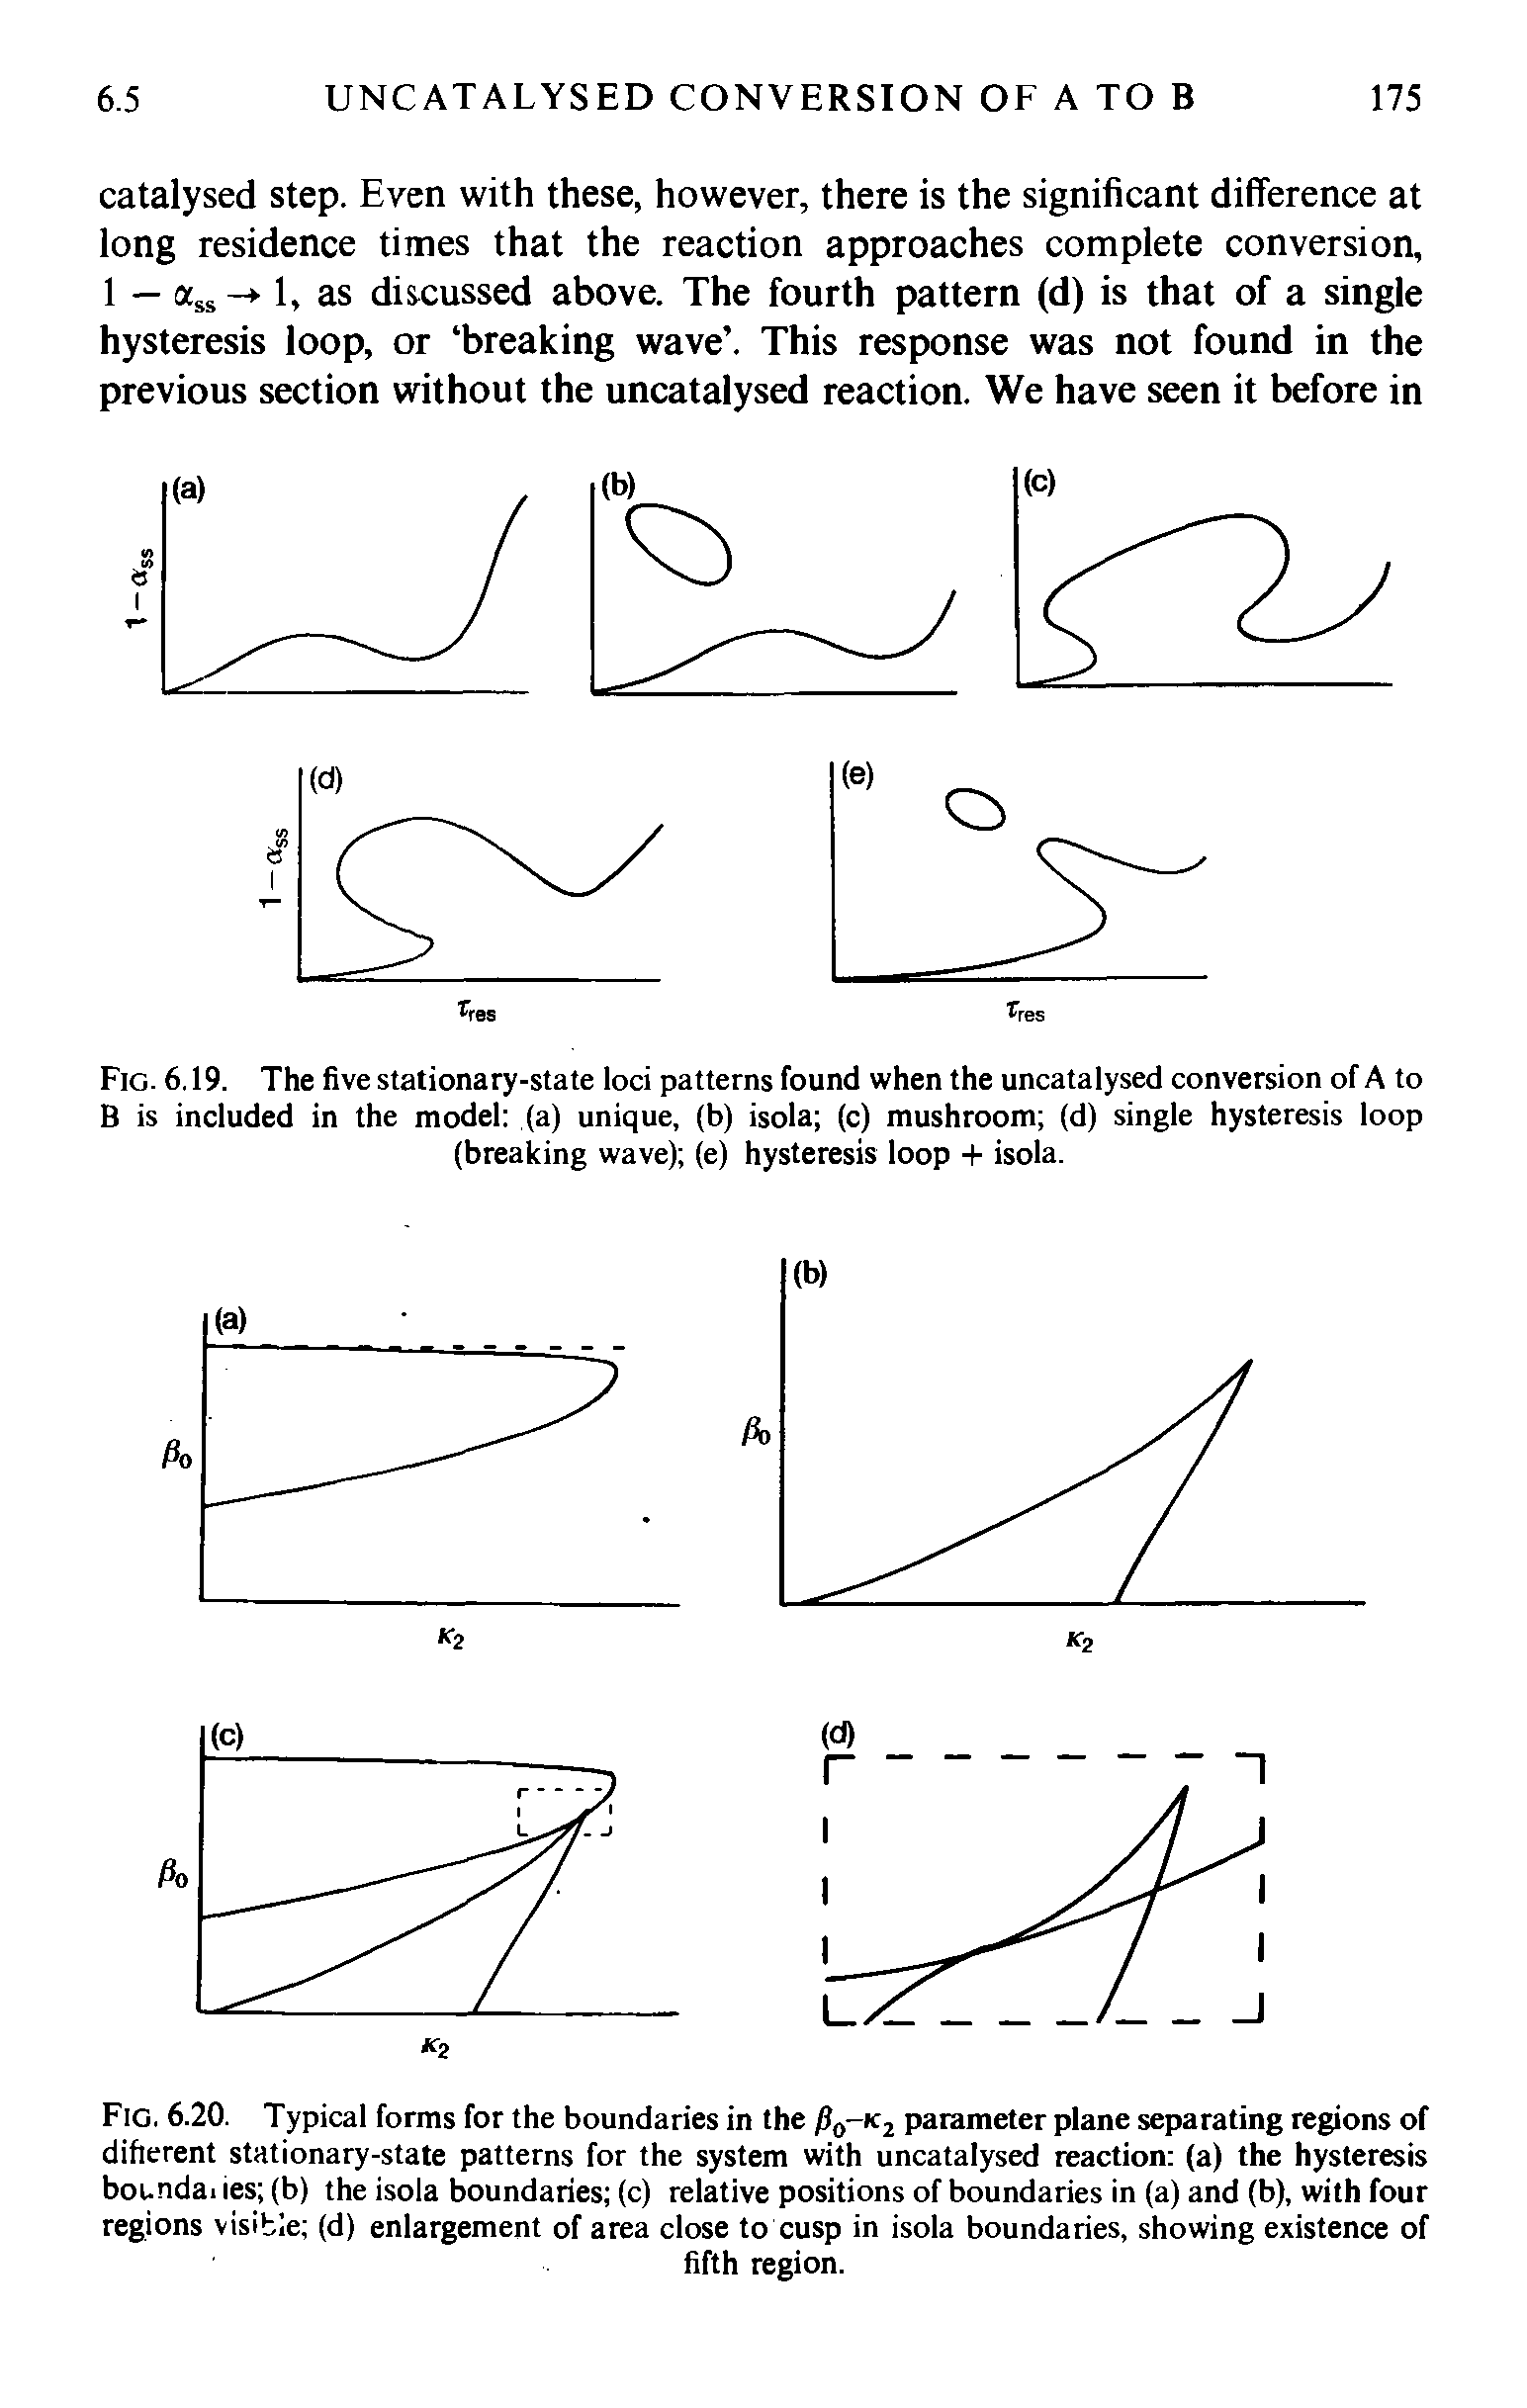 Fig. 6.20. Typical forms for the boundaries in the /)0-ic2 parameter plane separating regions of diflerent stationary-state patterns for the system with uncatalysed reaction (a) the hysteresis bocndai ies (b) the isola boundaries (c) relative positions of boundaries in (a) and (b), with four regions visible (d) enlargement of area close to cusp in isola boundaries, showing existence of...